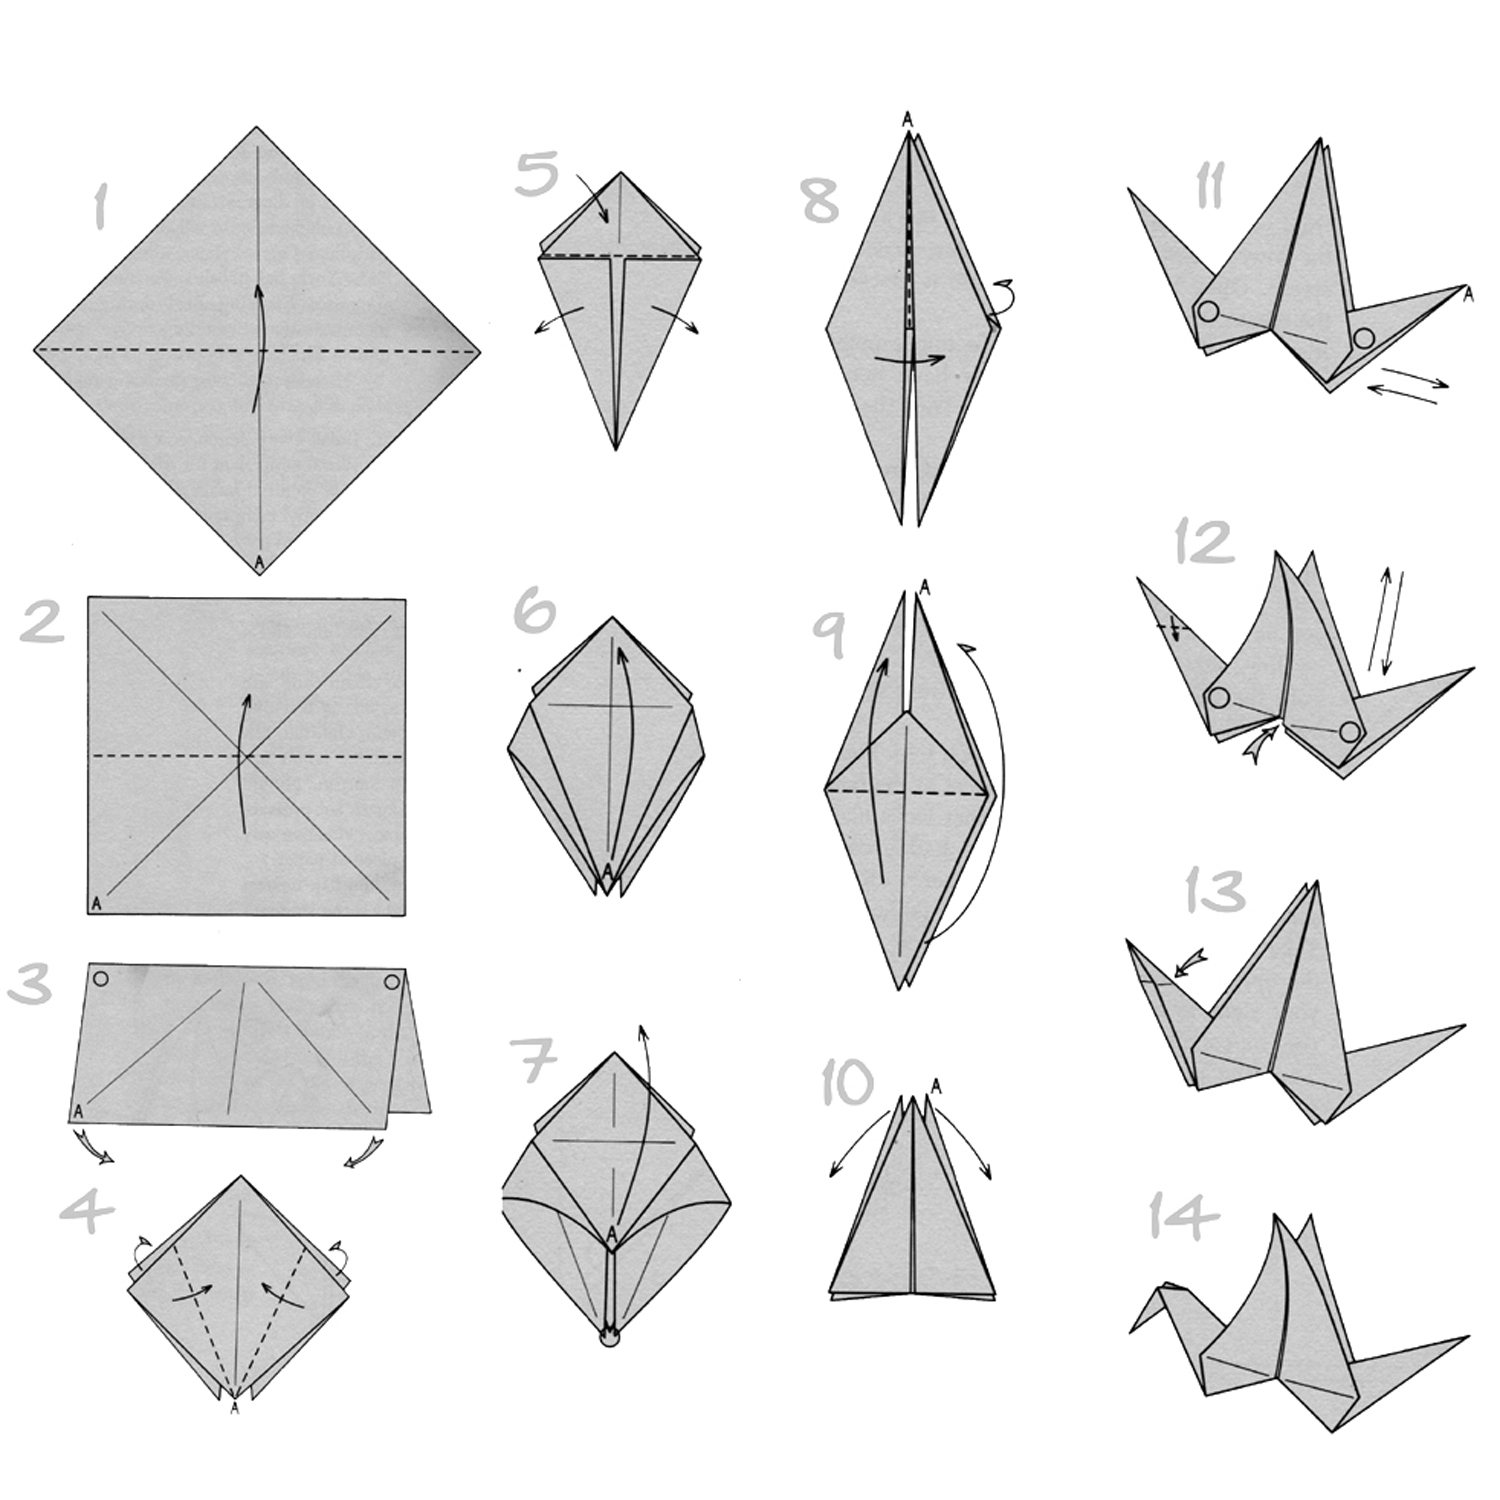 How To Do Origami Bird Step By Step 28 Build From Something Simple Origami Project 54